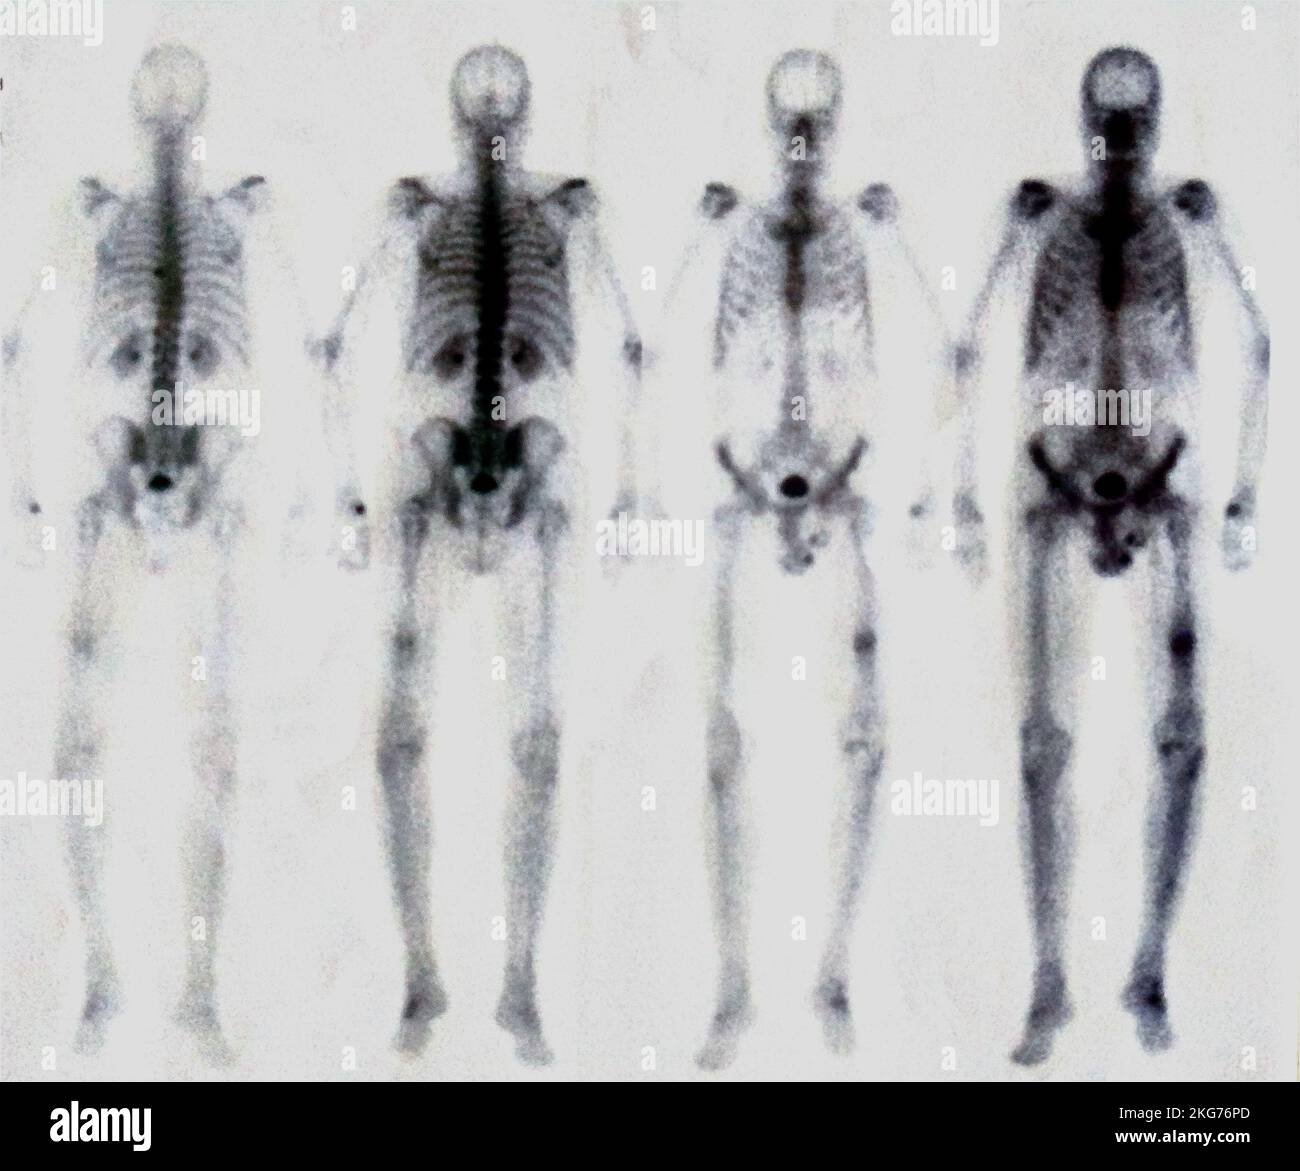 Scintigram of a man in the mid-sixties. Osteoarthritis diagnosis. Scintigraphy is a nuclear medicine examination method. Stock Photo